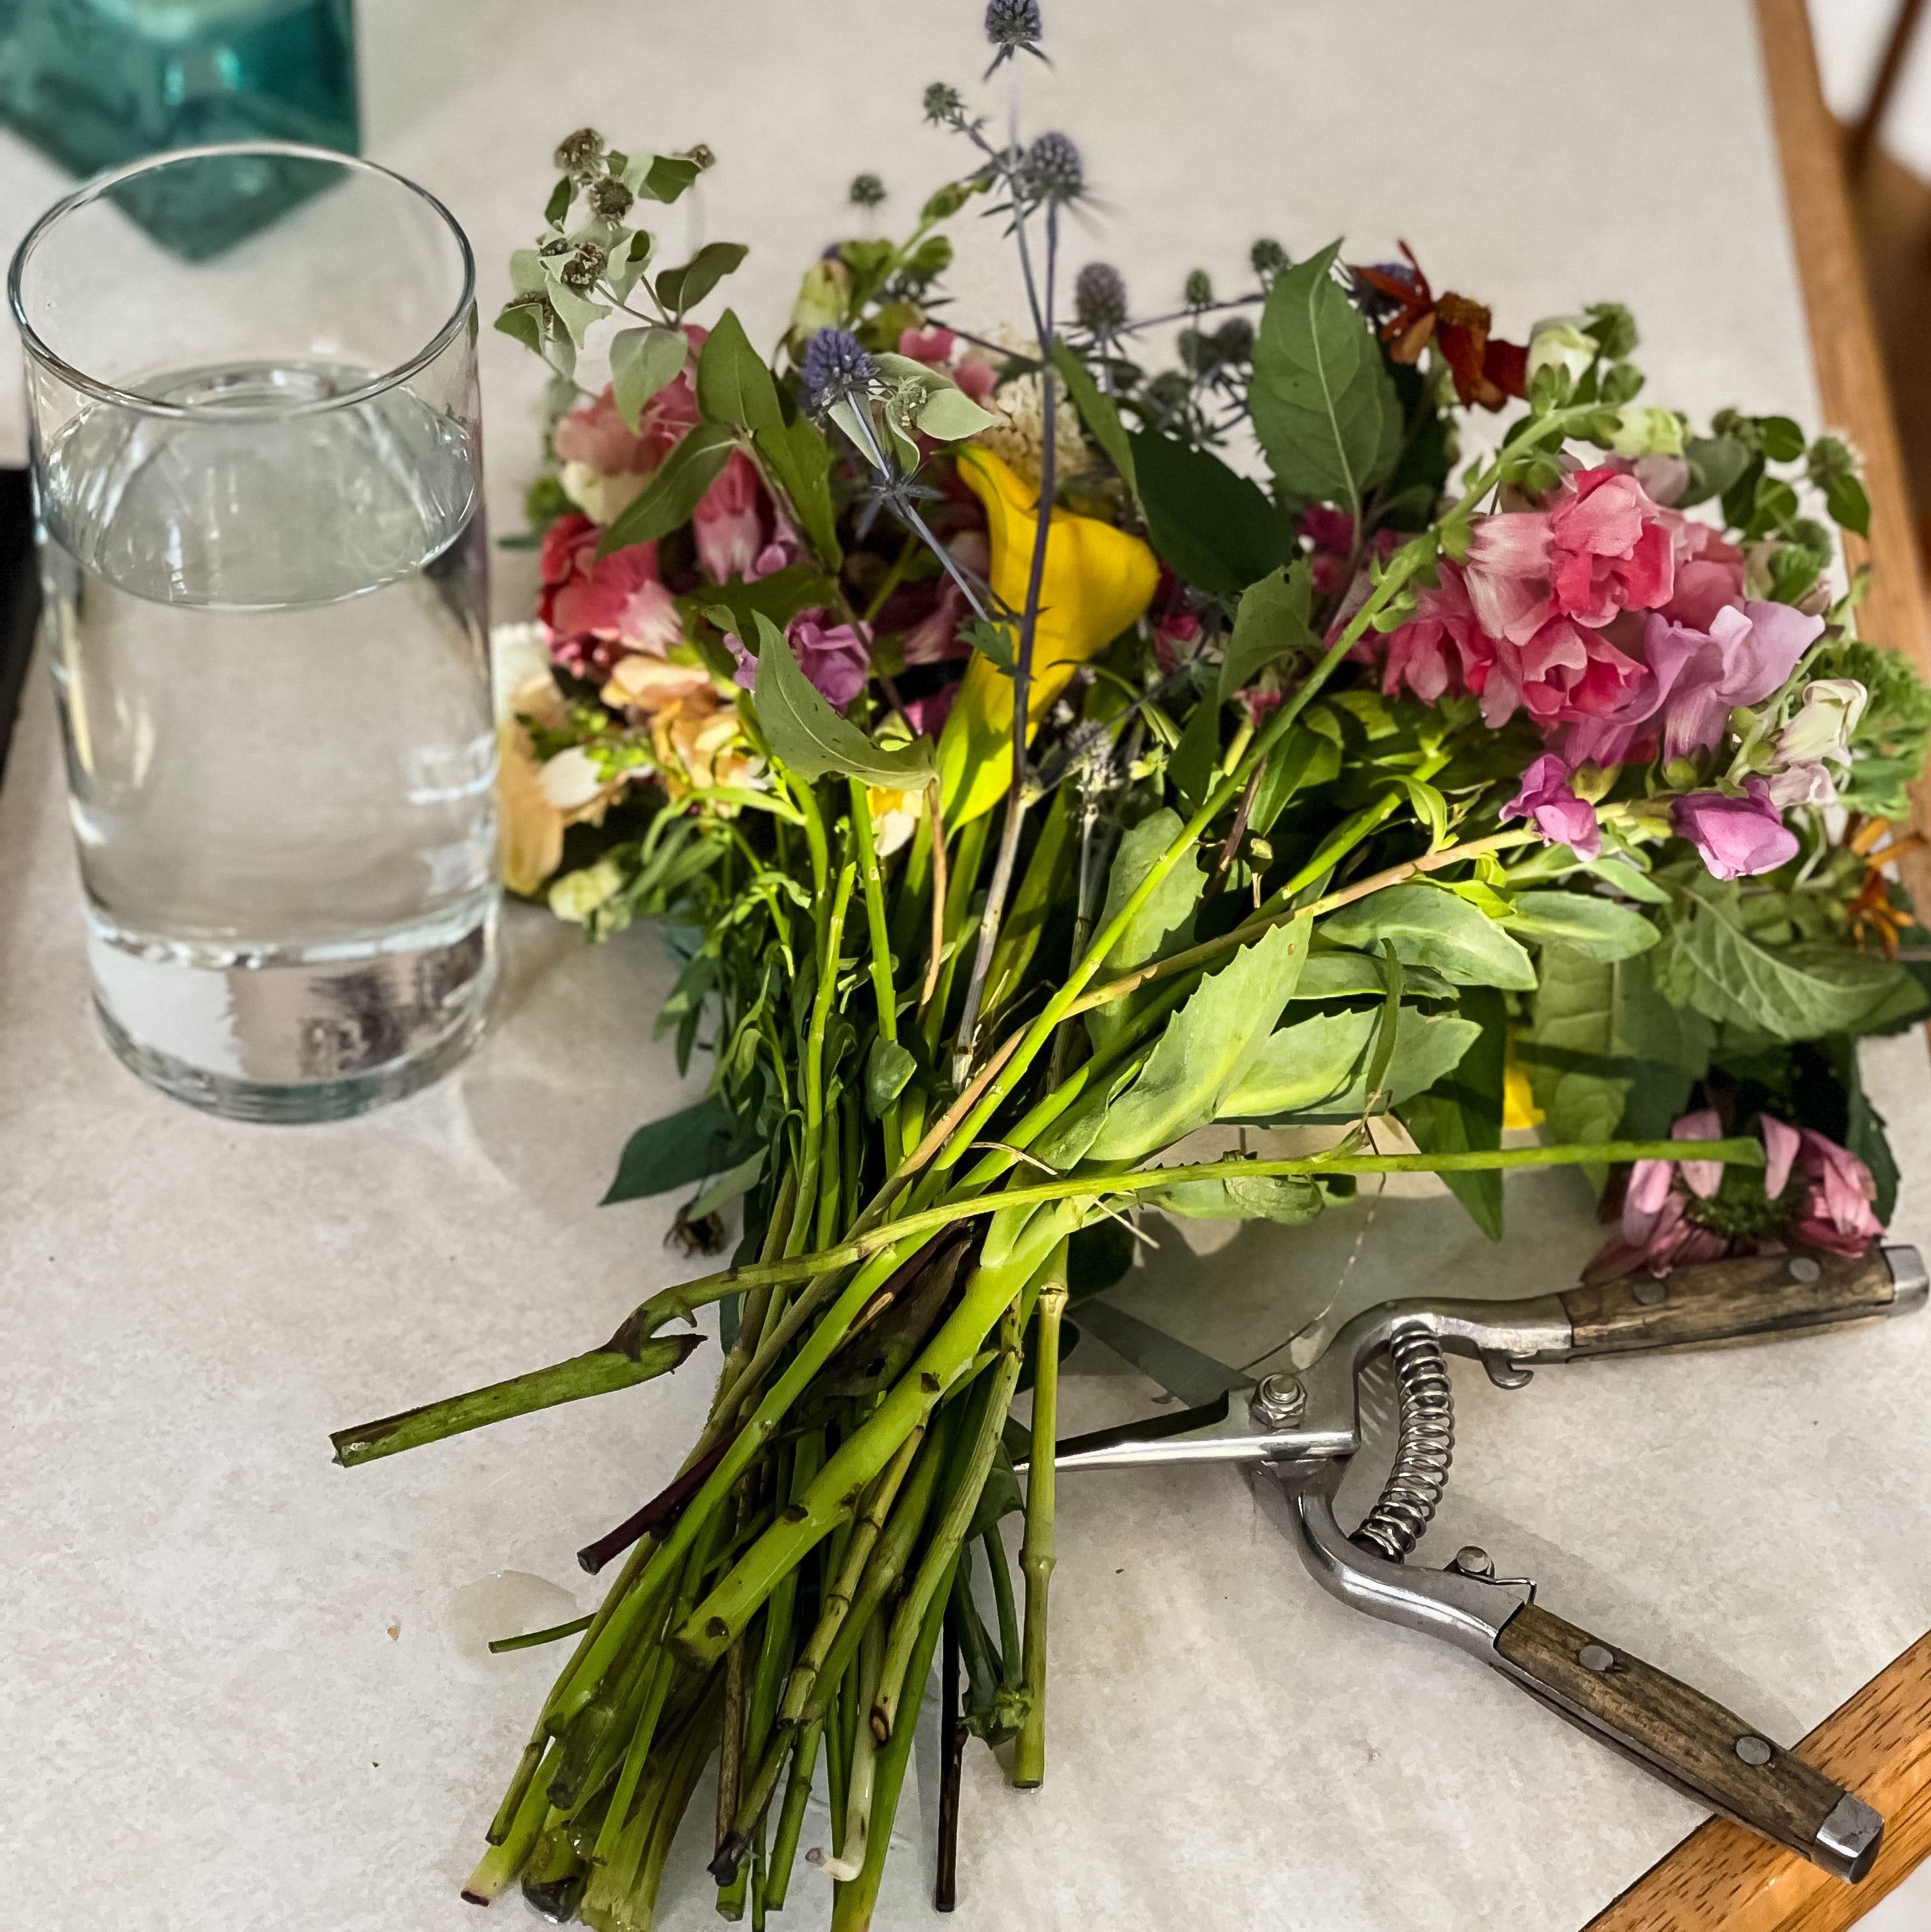 How To Keep Fresh Cut Flowers Alive Longer? - SnapBlooms